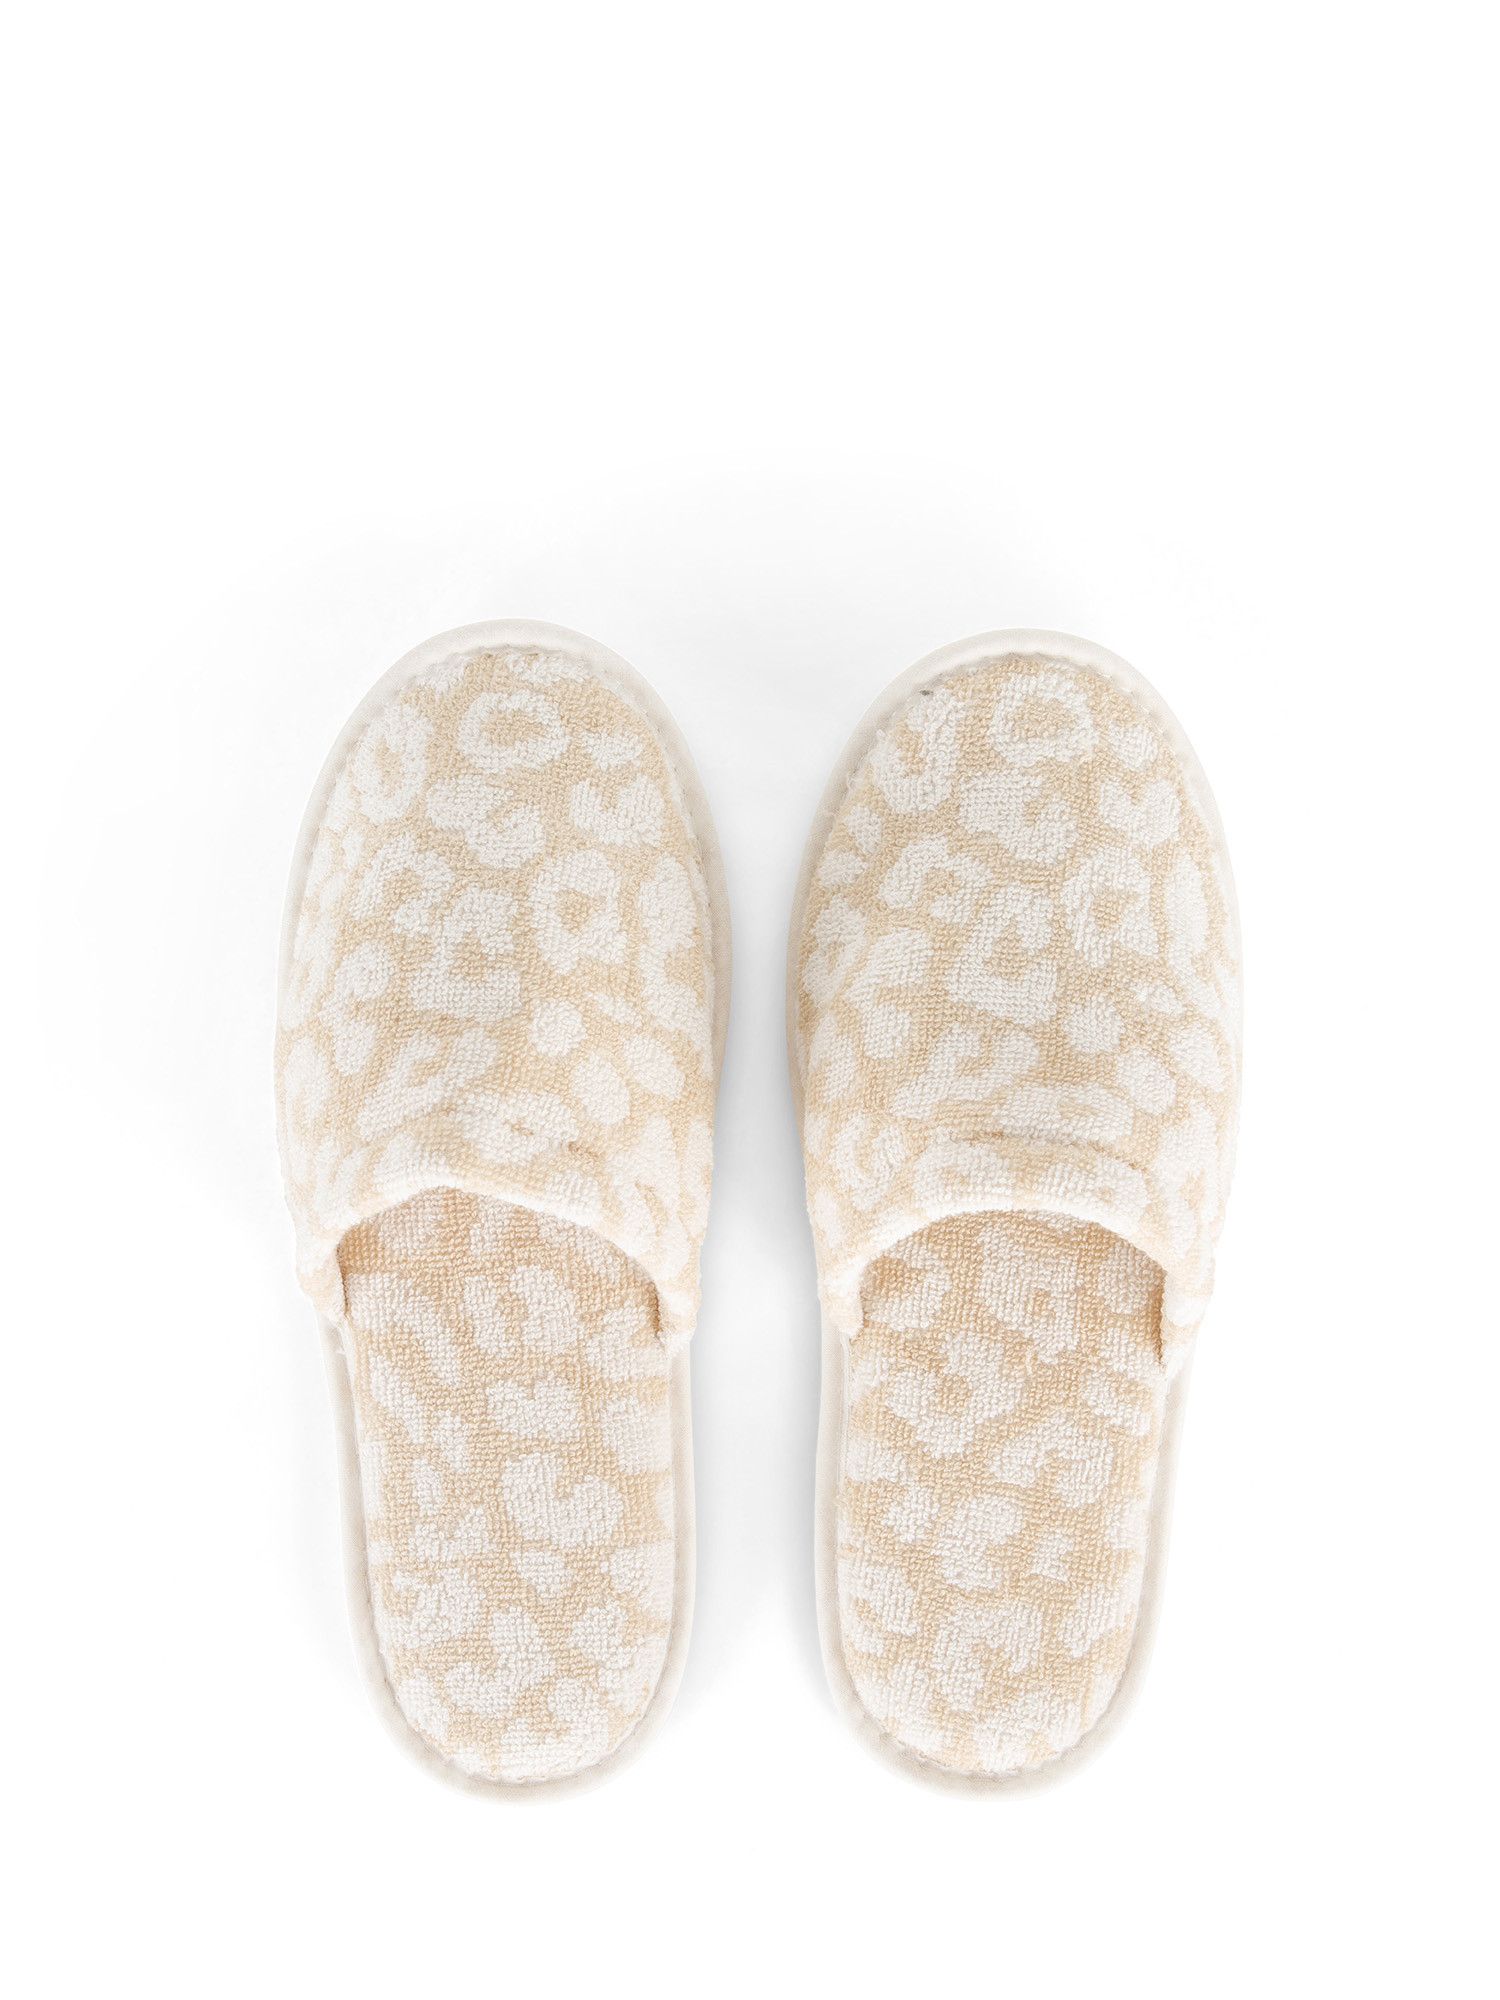 Animal print jacquard cotton terry slippers, Cream, large image number 0